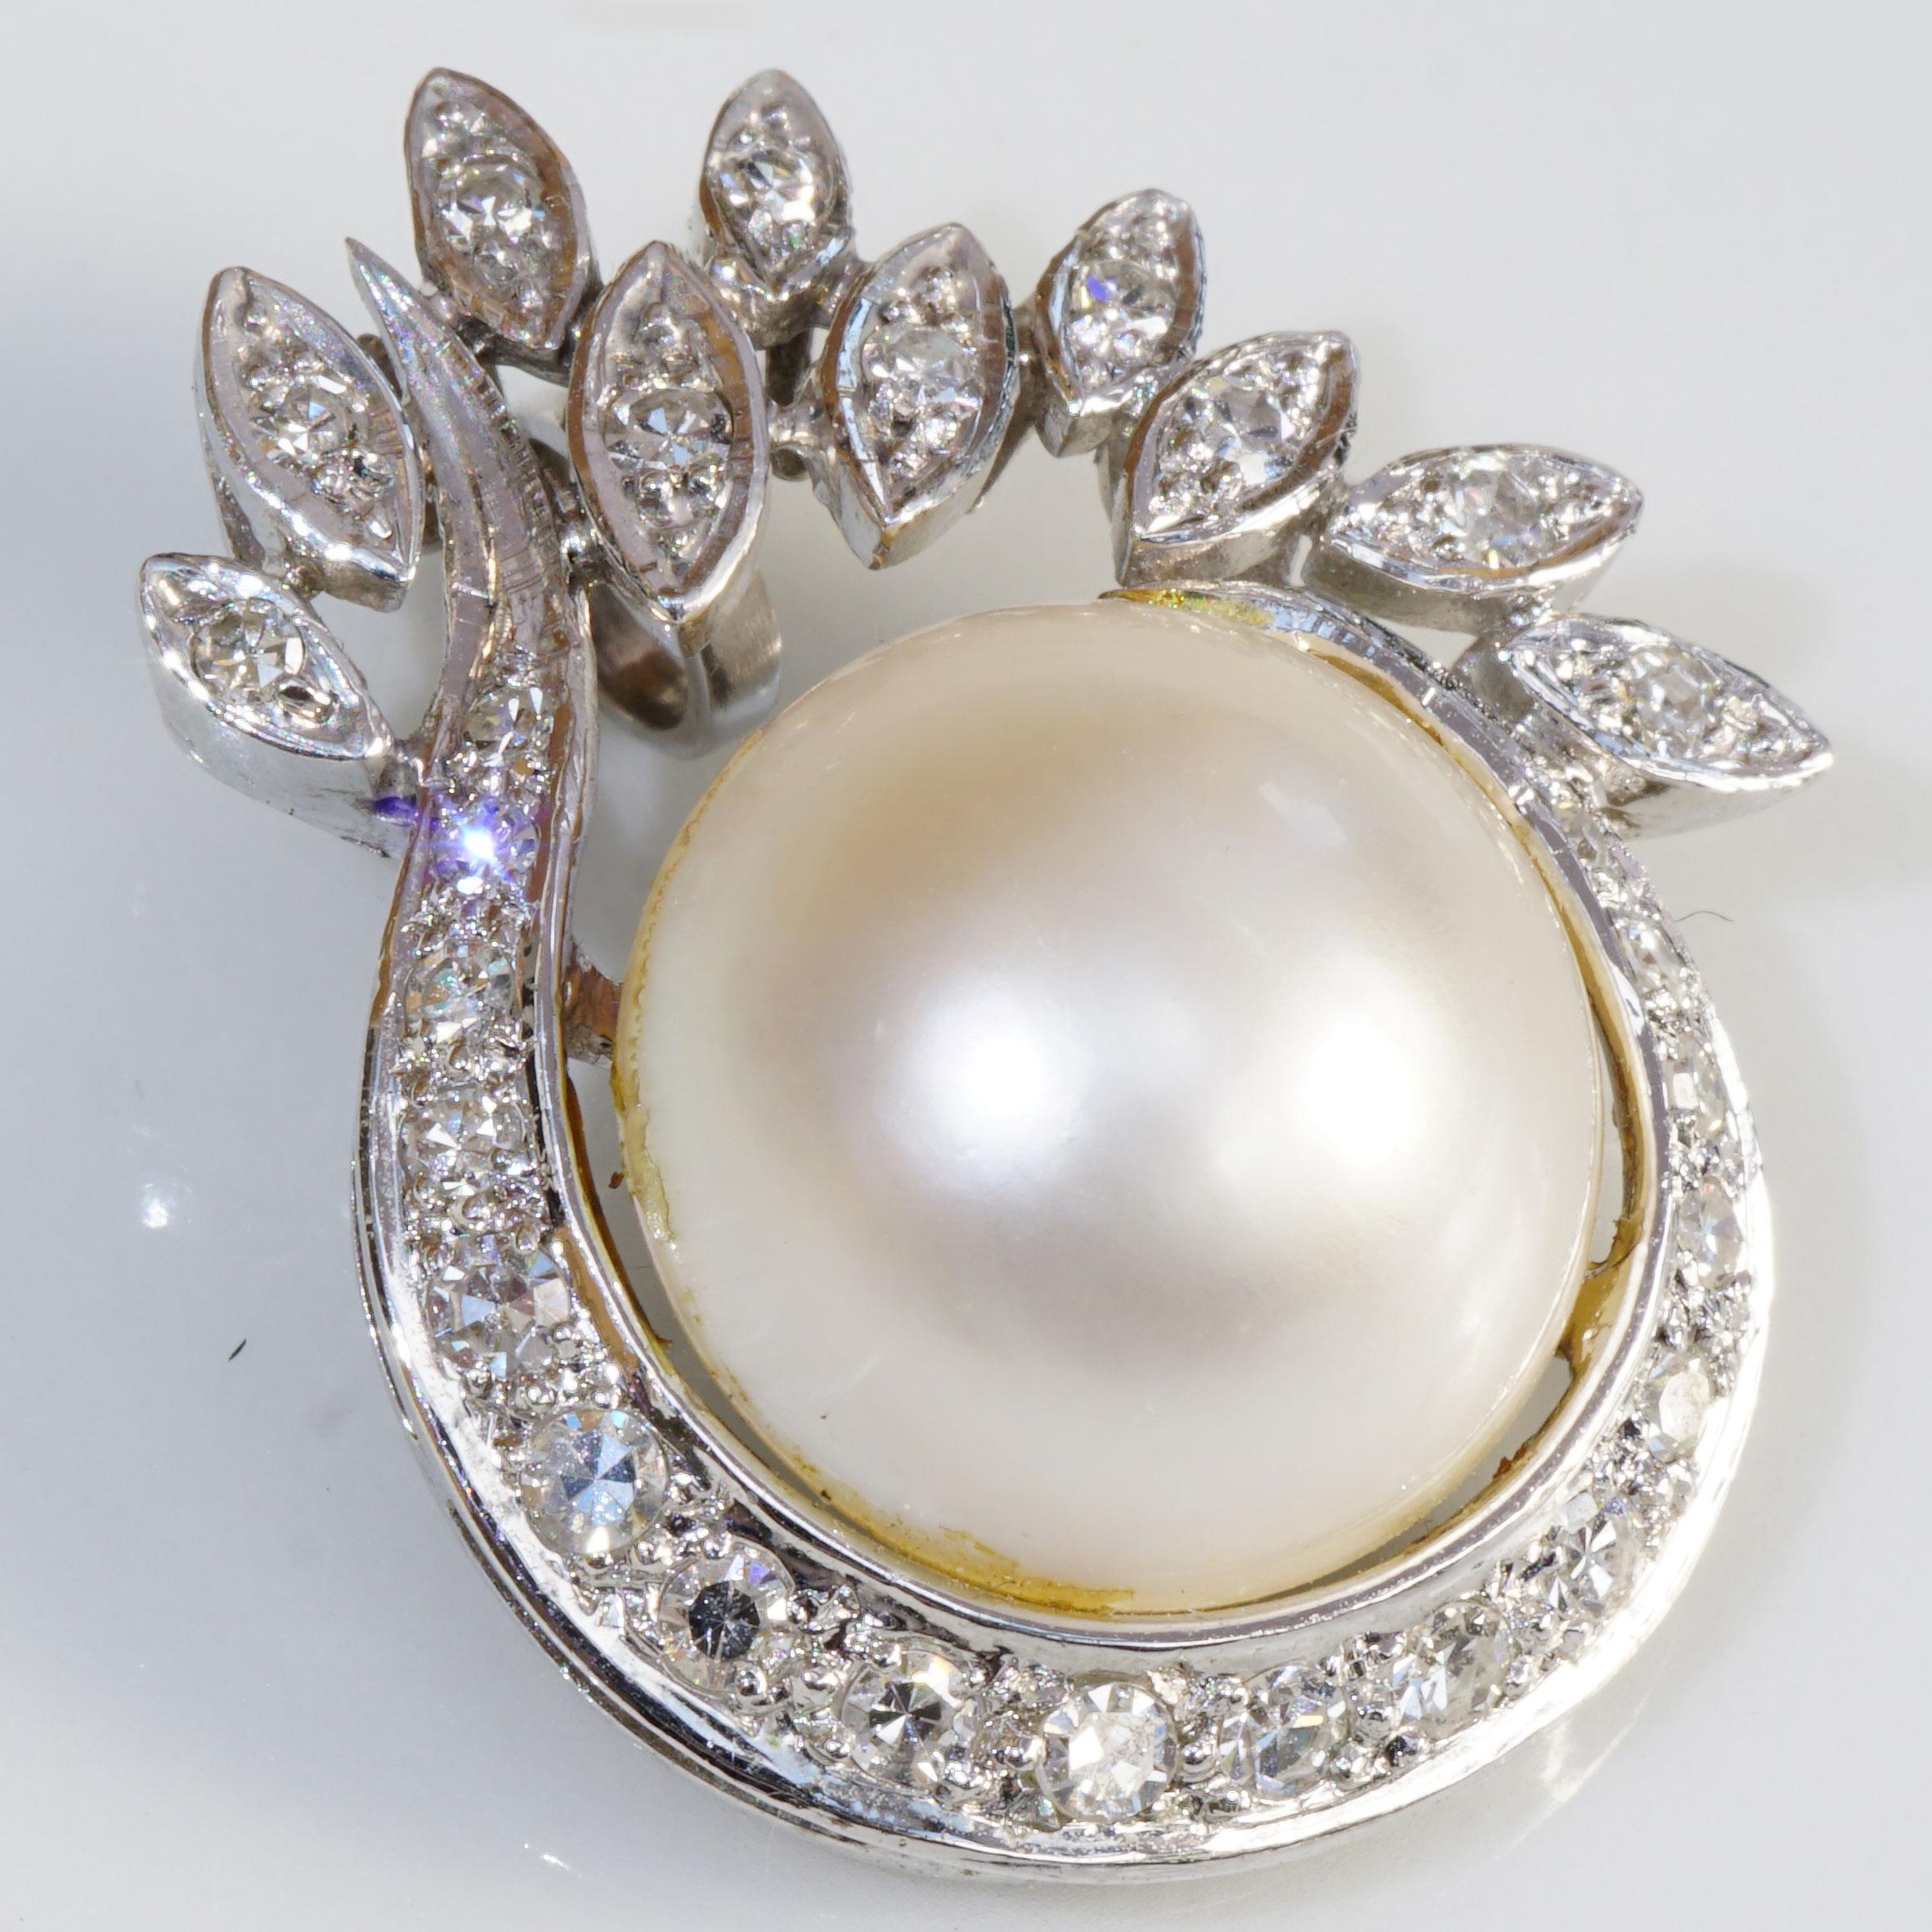 what a wonderful shape this festive pendant with a large eyelet (diameter 4 mm) has a magical attraction, an eye-catcher, in the middle a very fine white mabe pearl AAA+ with 13.8 mm diameter high-quality in a bowl-shaped setting, Leaf-like and